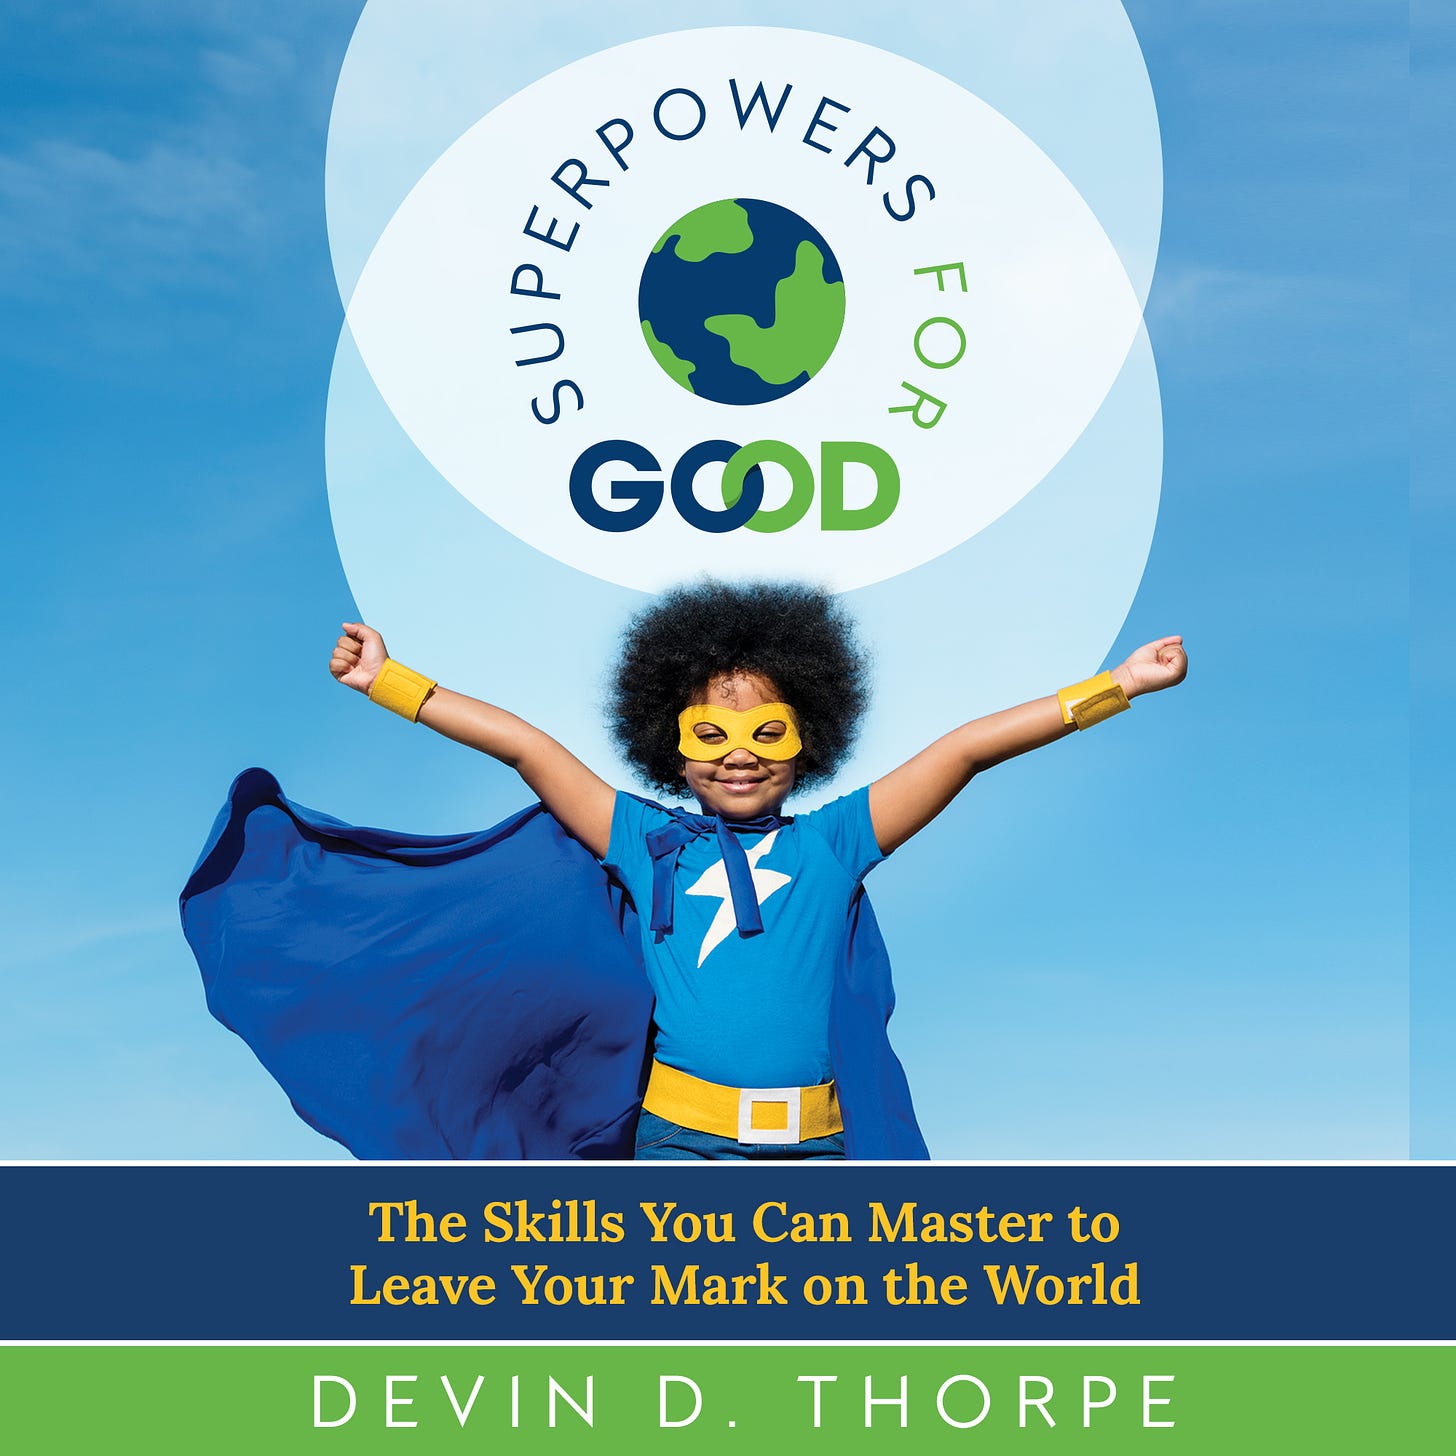 Book cover for Superpowers for Good, showing a kid dressed as a superhero.